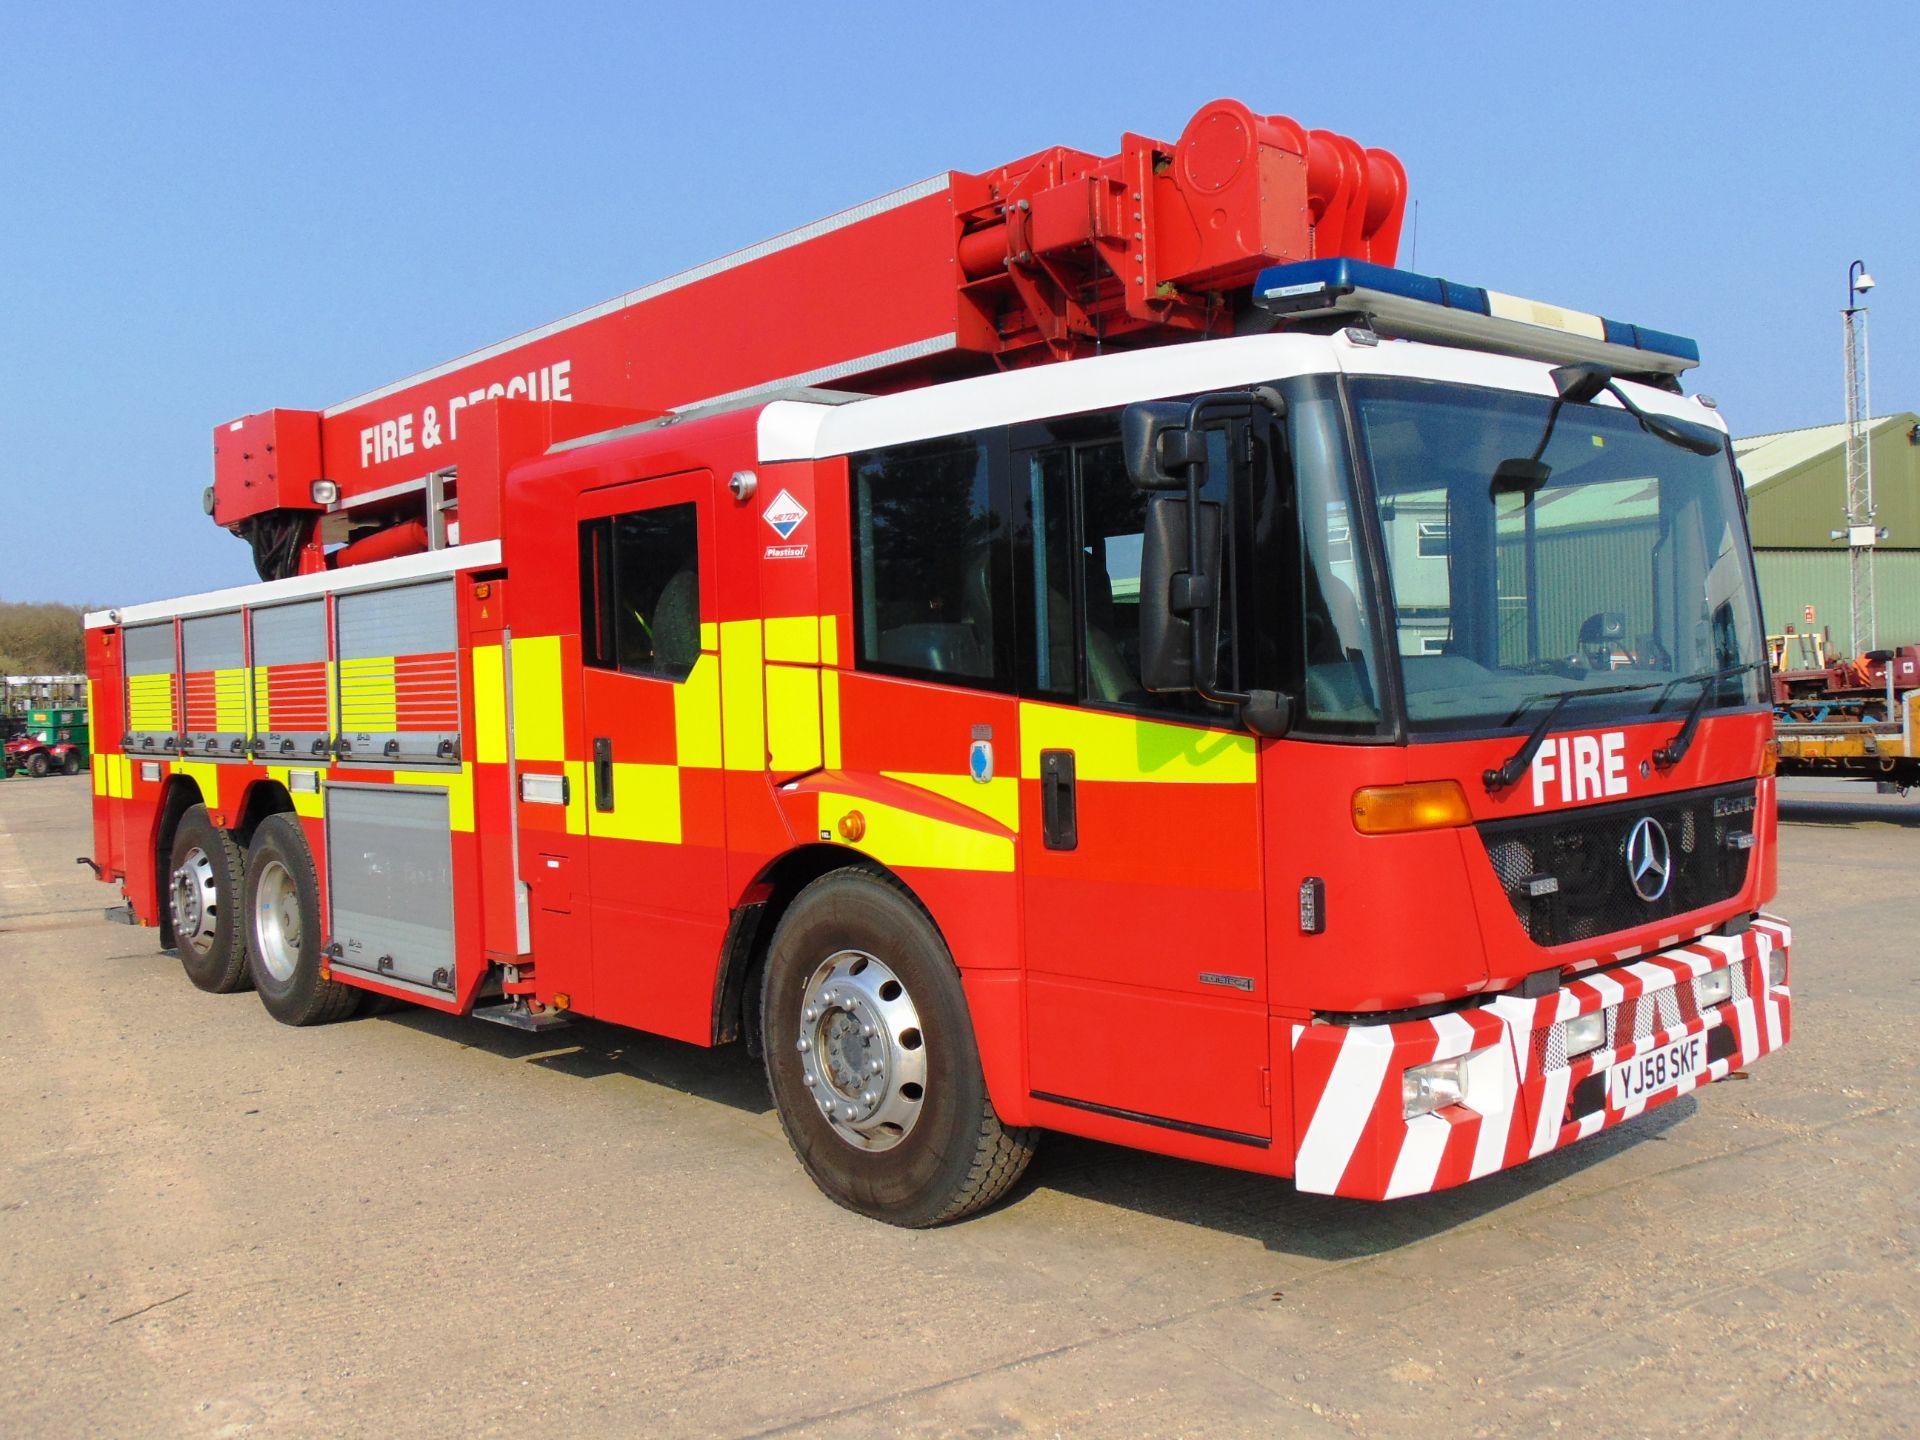 2008 Mercedes Econic CARP (Combined Aerial Rescue Pump) 6x2 Aerial Work Platform / Fire Appliance - Image 21 of 49